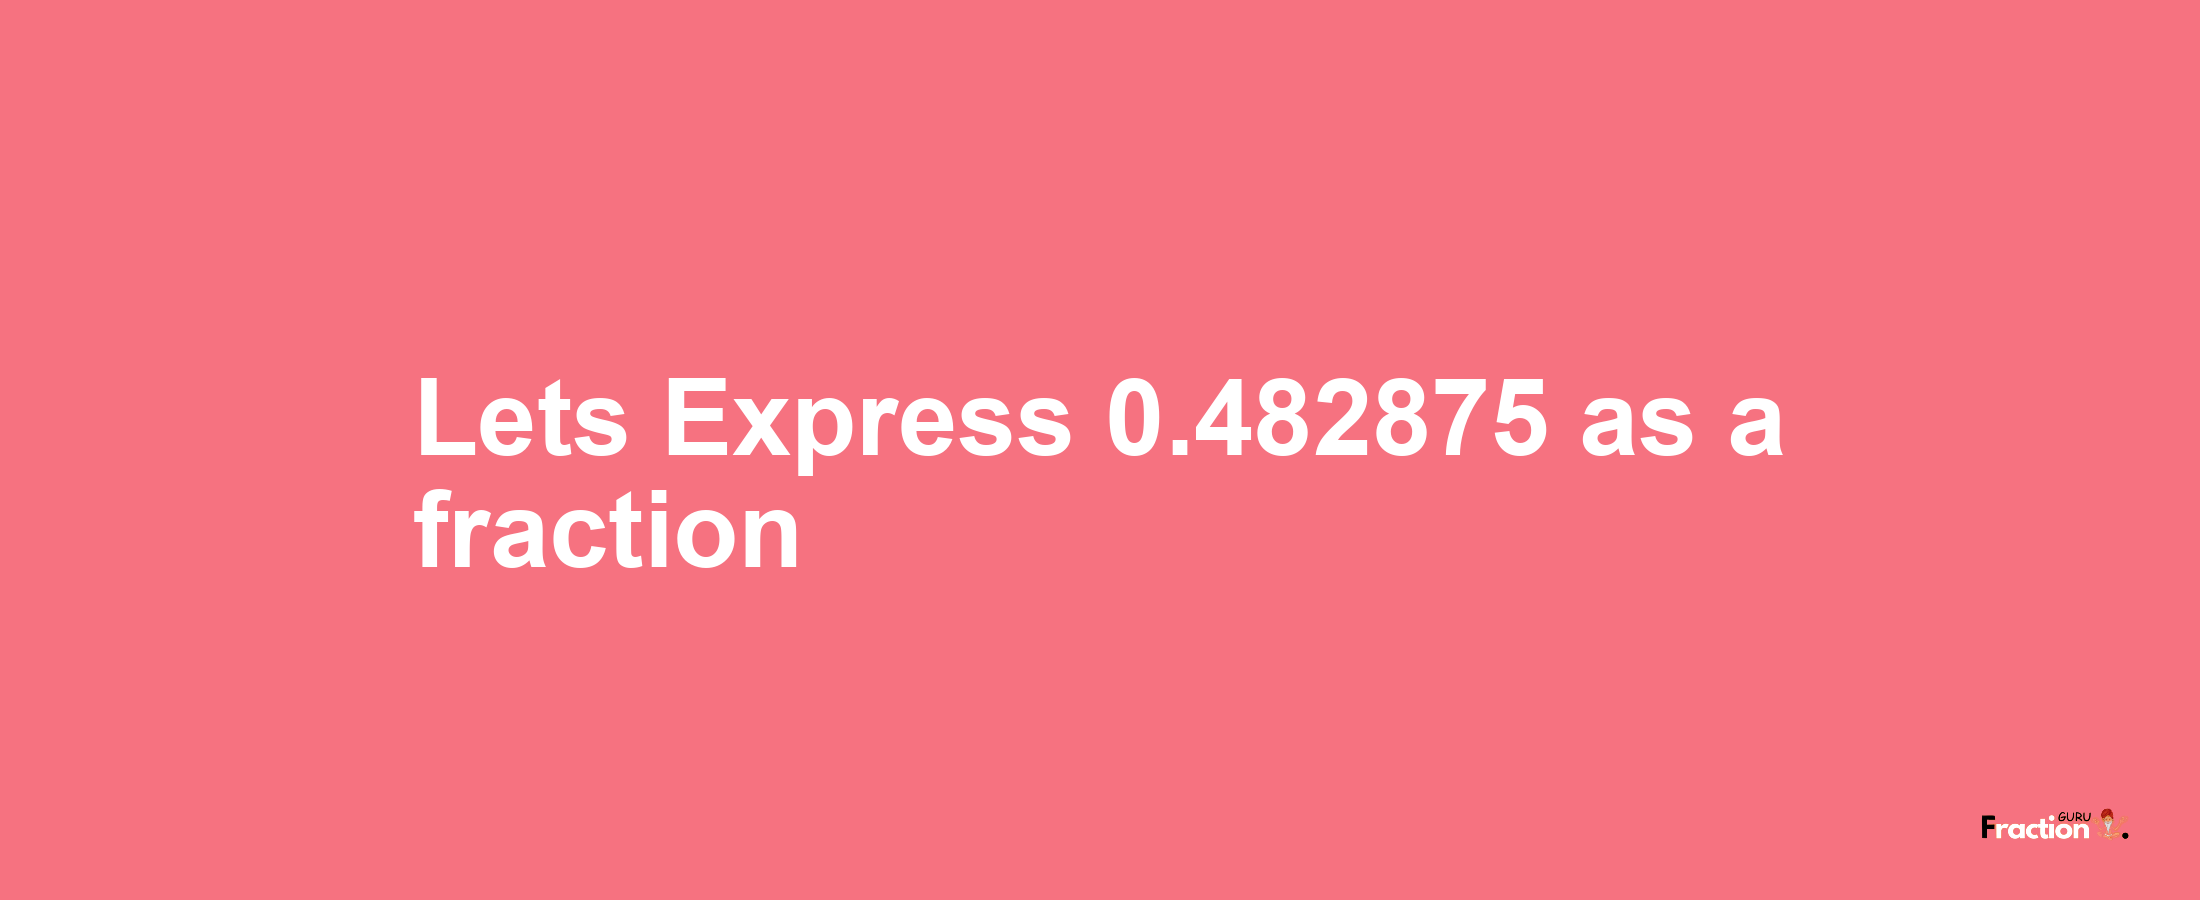 Lets Express 0.482875 as afraction